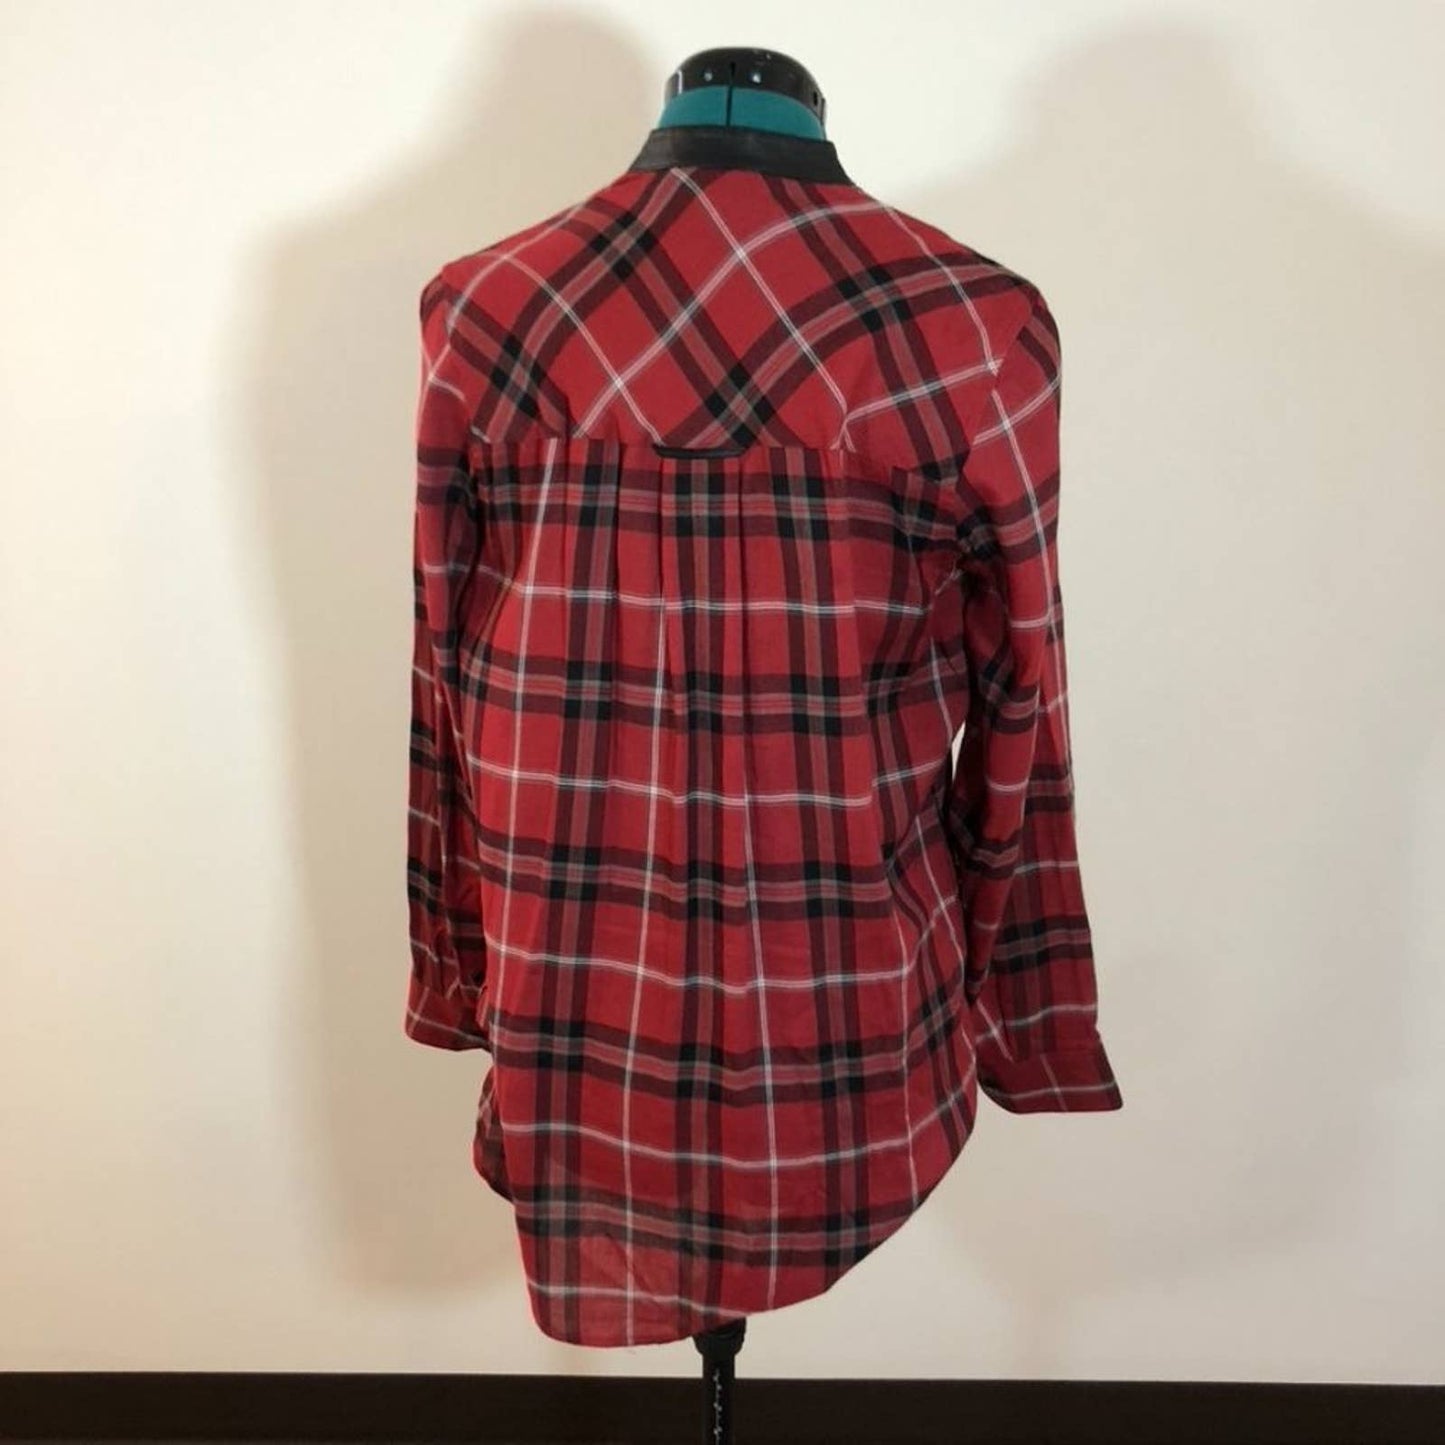 Vince Red Plaid Blouse with Leather Trim - Size 6Markita's ClosetVince